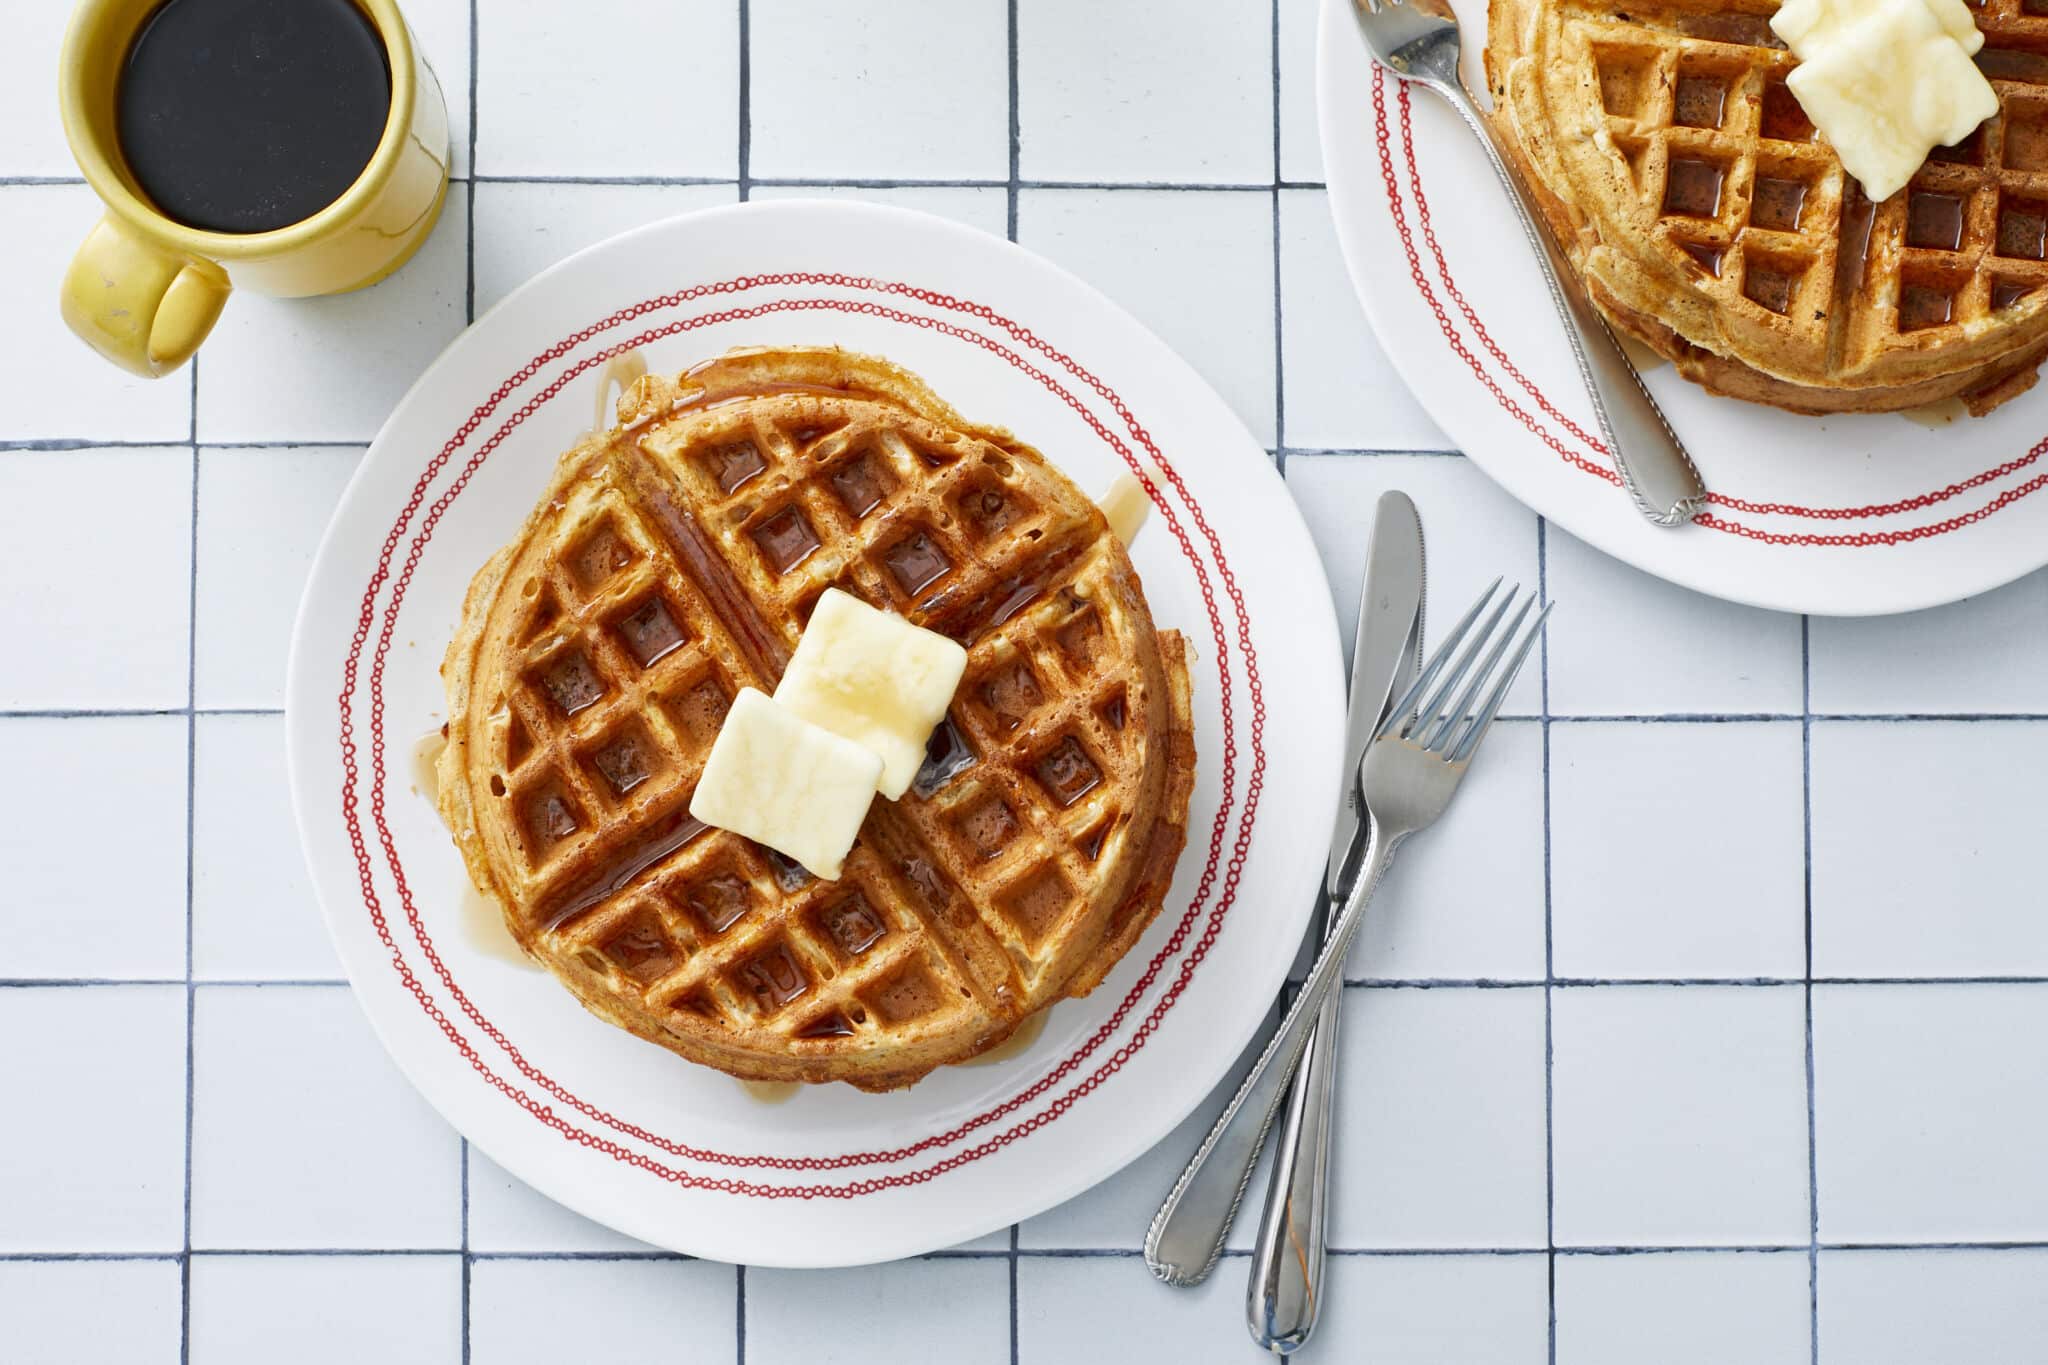 An overhead shot at big golden, fluffy and crispy Whole Wheat Waffles with Wheat Germ served on plates with butter and maple syrup. A cup of coffee is on the side.